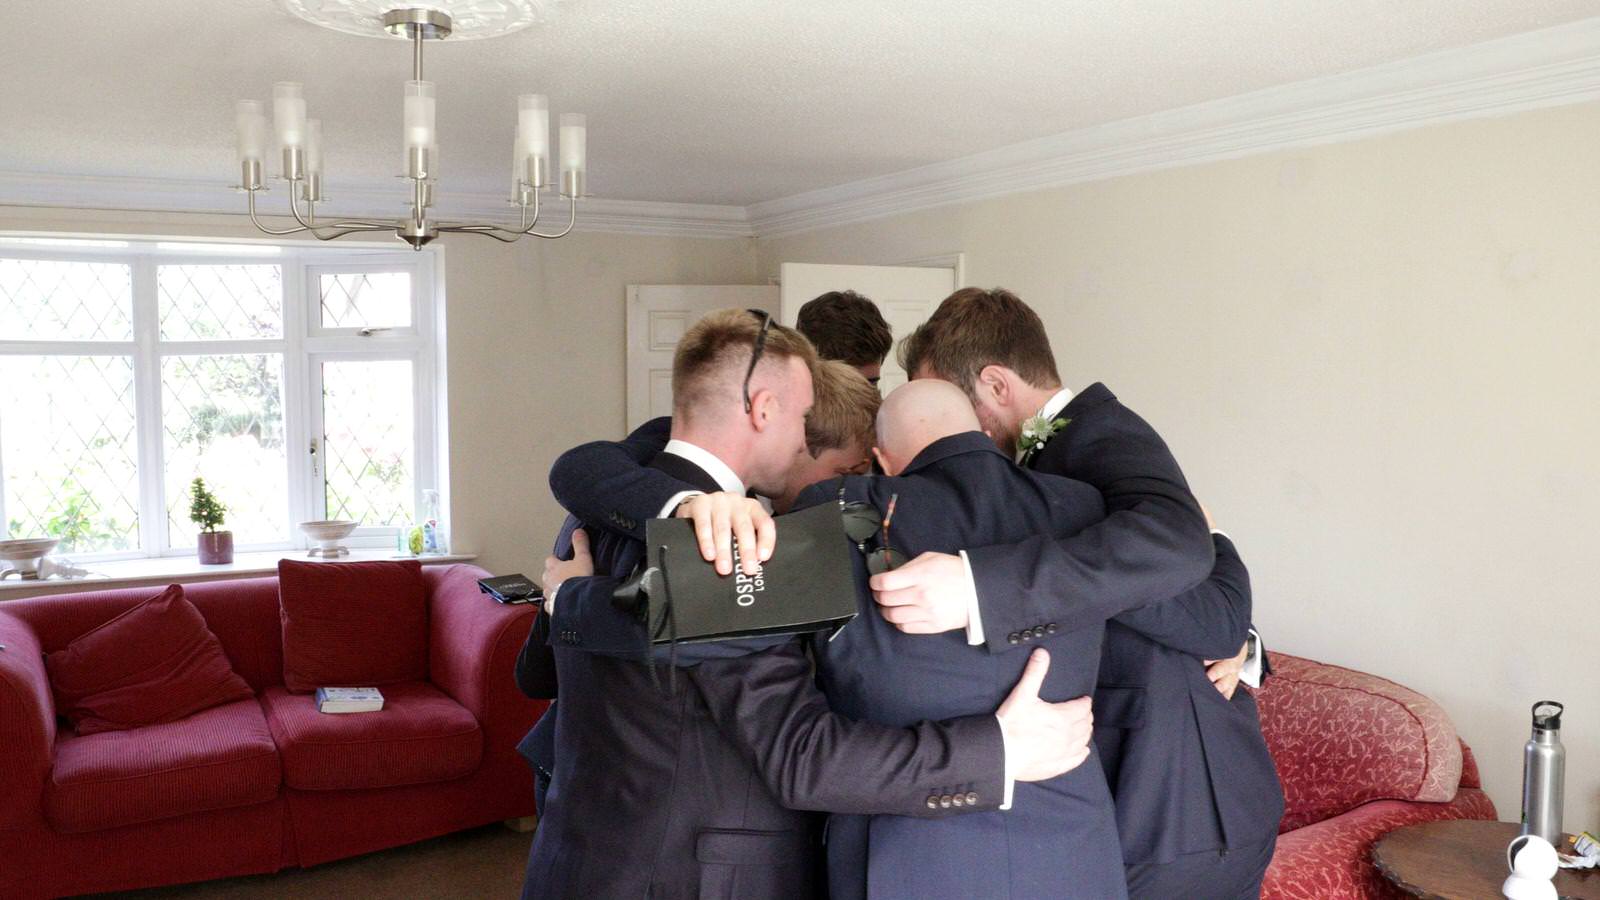 groom joins in group hug with friends